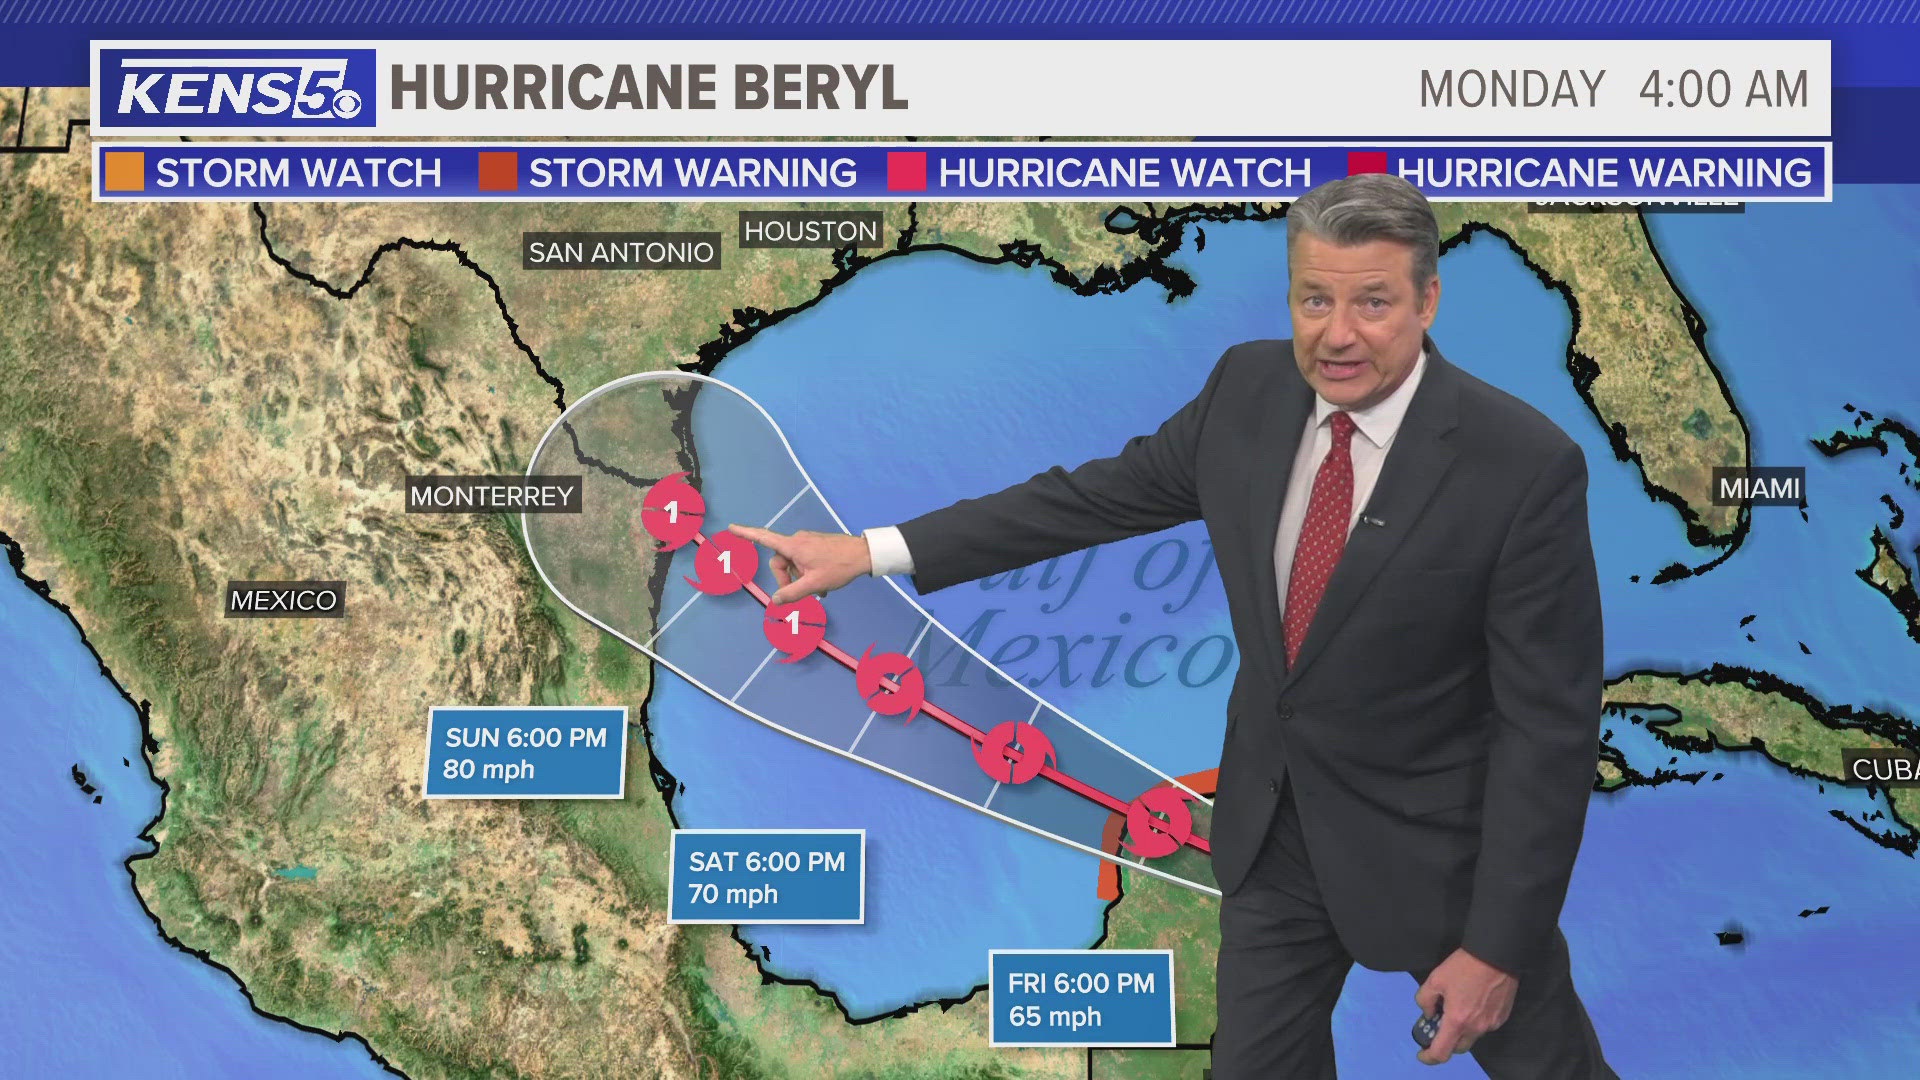 Beryl is expected to make landfall early Sunday afternoon south of South Padre Island, TX.